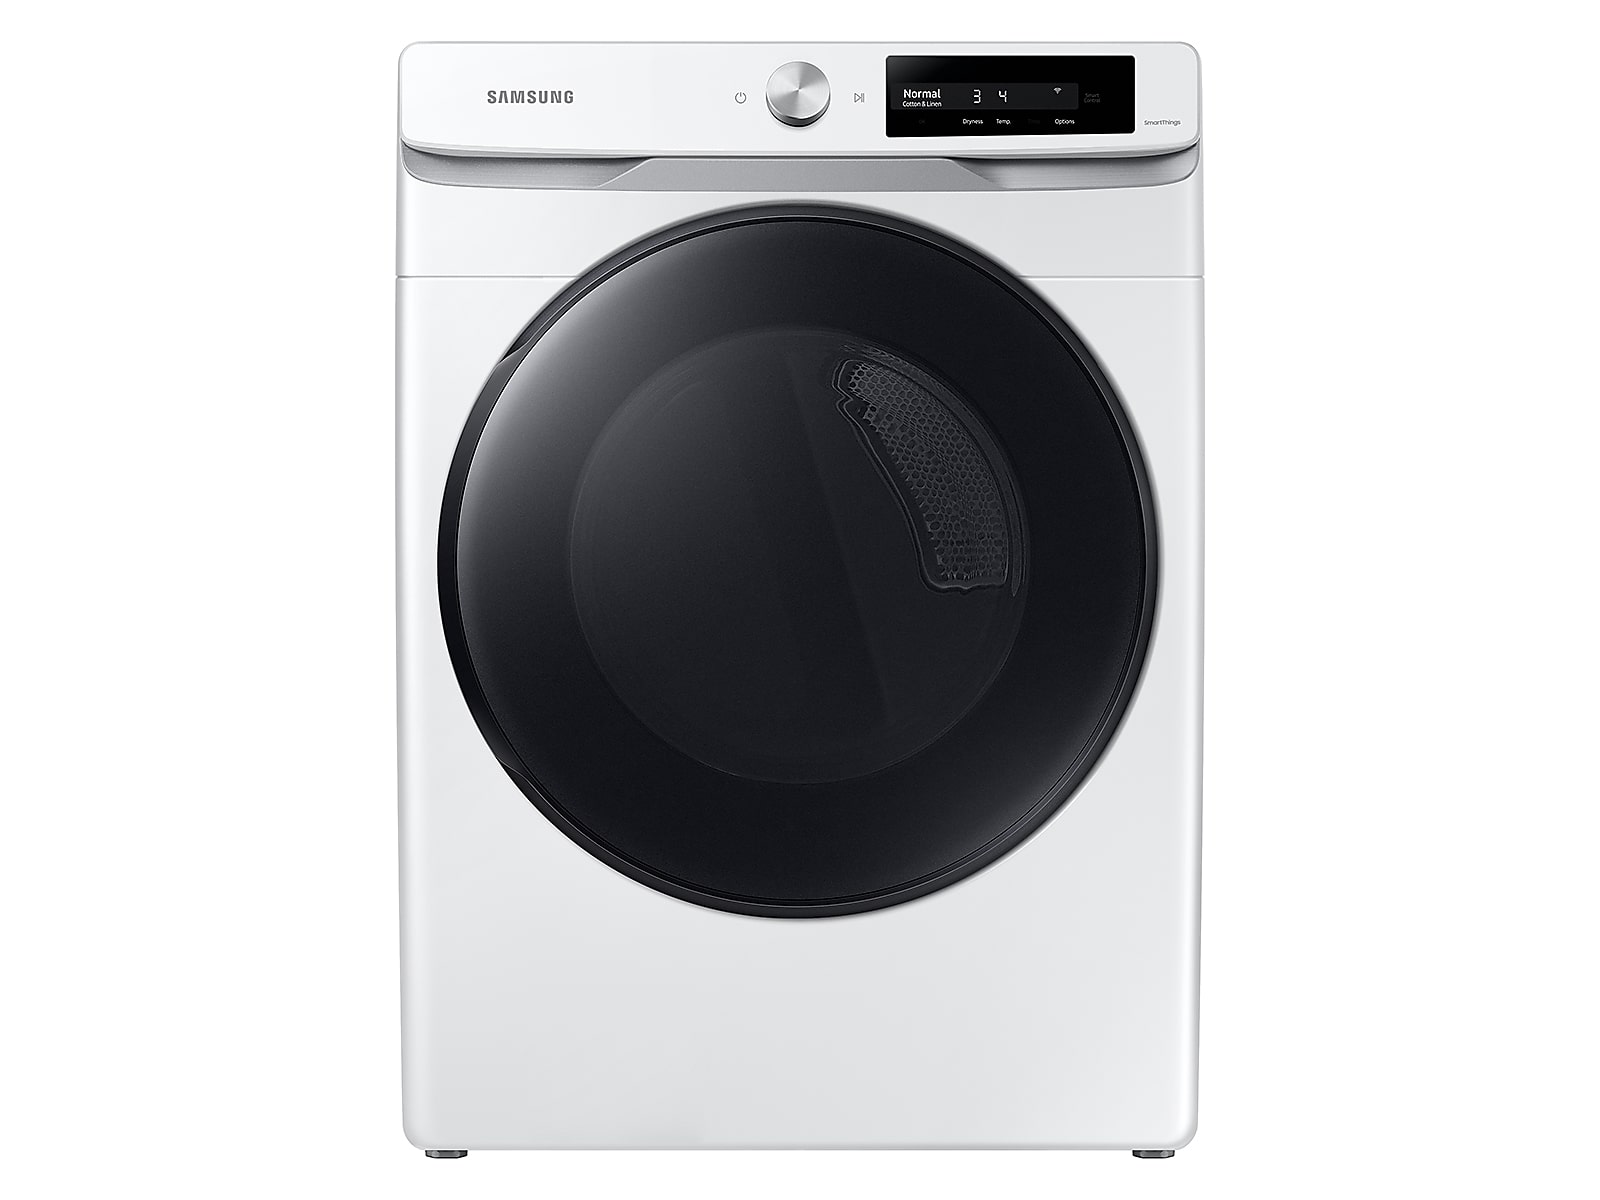 Samsung 7.5 cu. ft. Smart Dial Electric Dryer with Super Speed Dry in White(DVE45A6400W/A3) photo